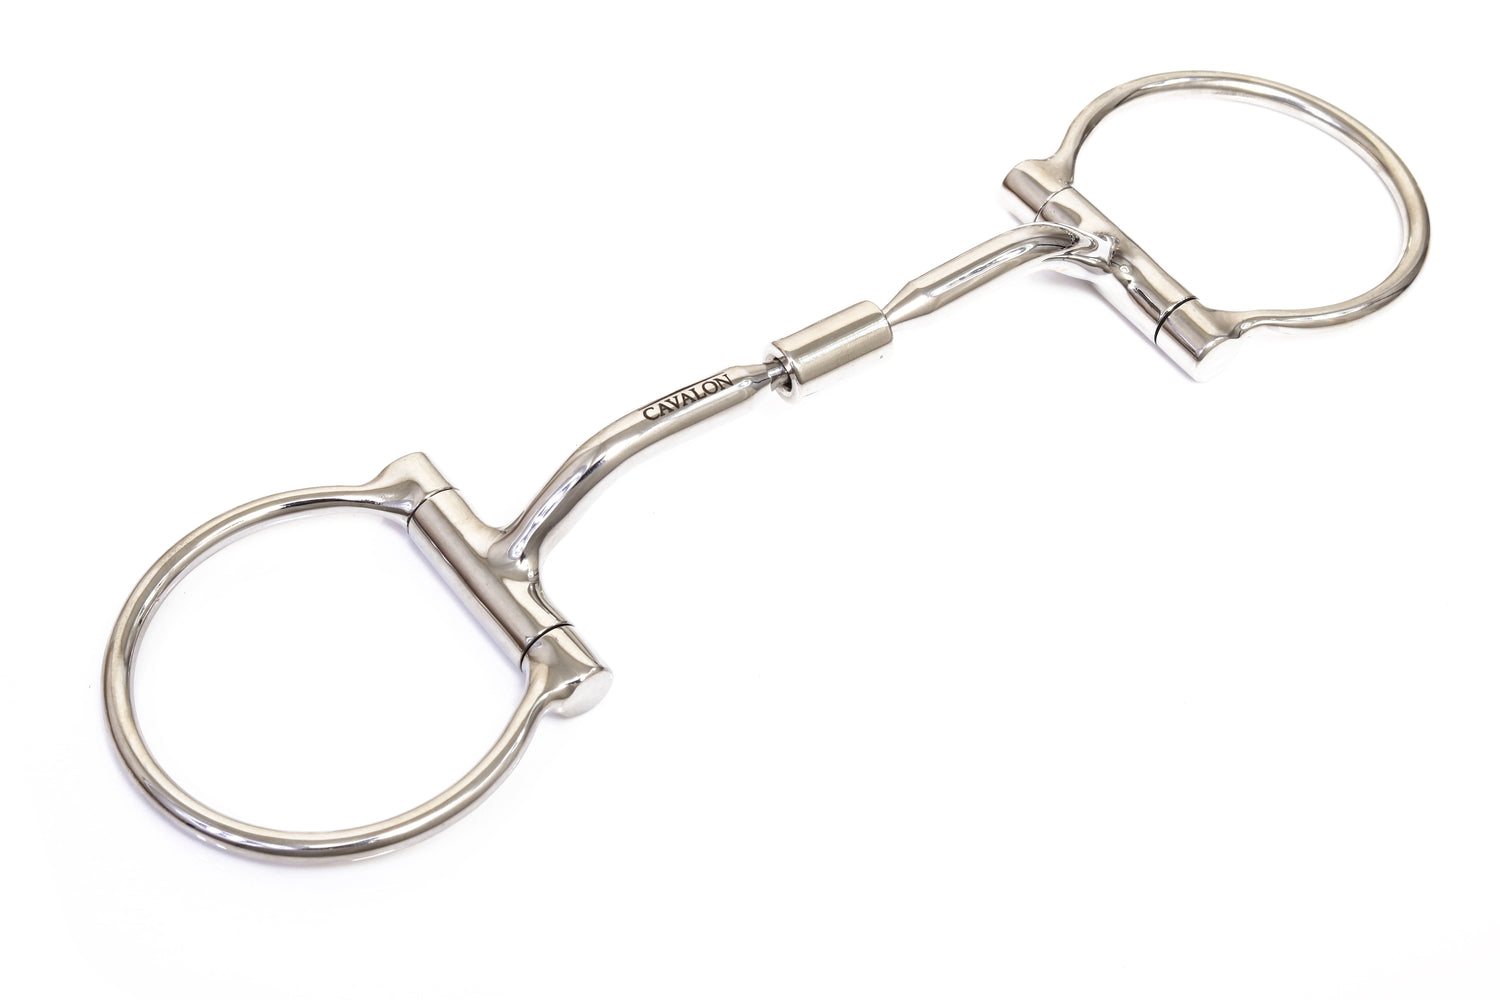 Cavalon Western D Ring Comfort Snaffle Bit with Copper Inlays